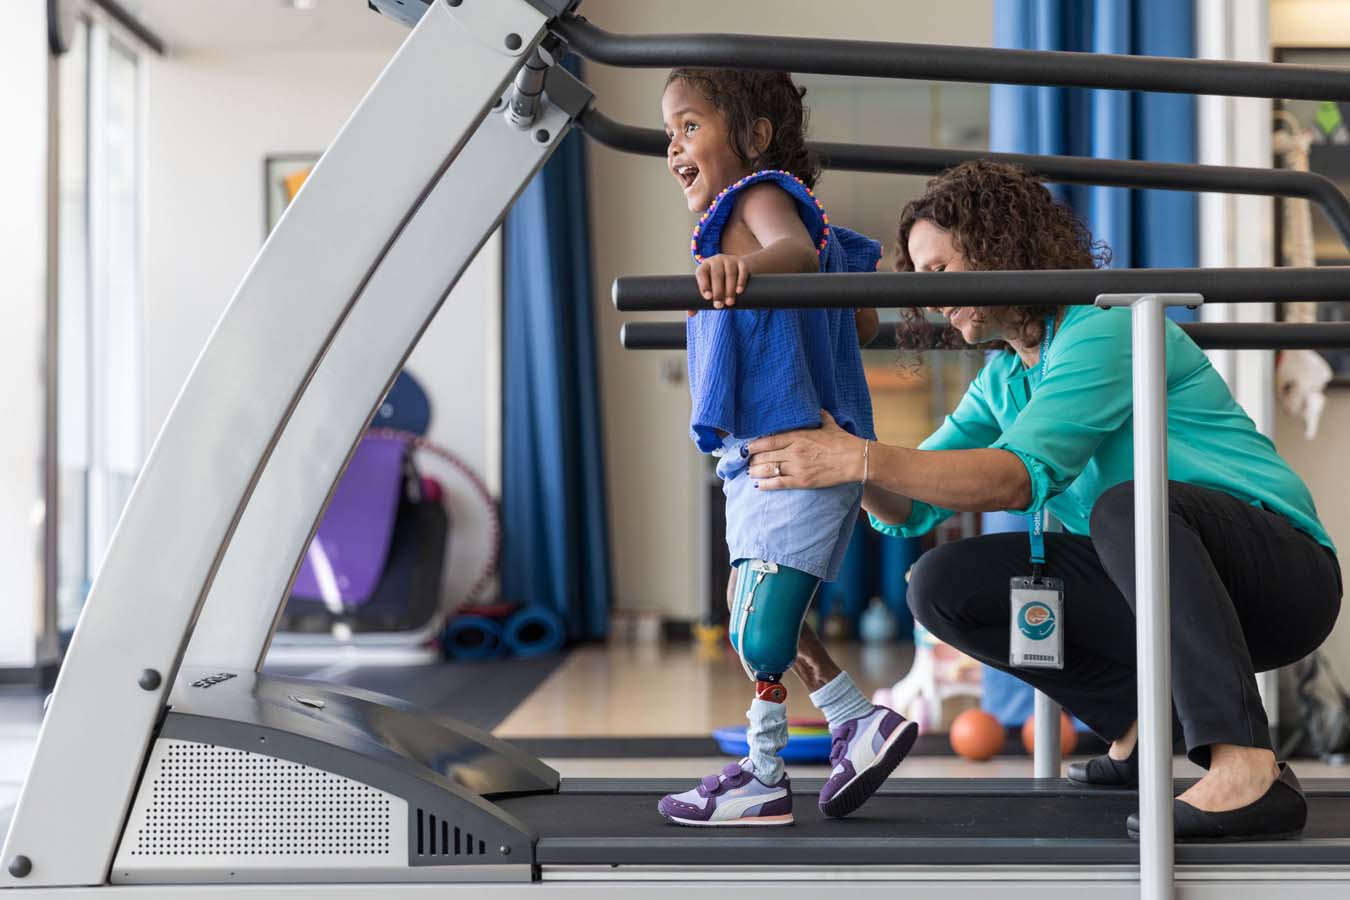 A girl learns to use her prosthetic on a treadmill